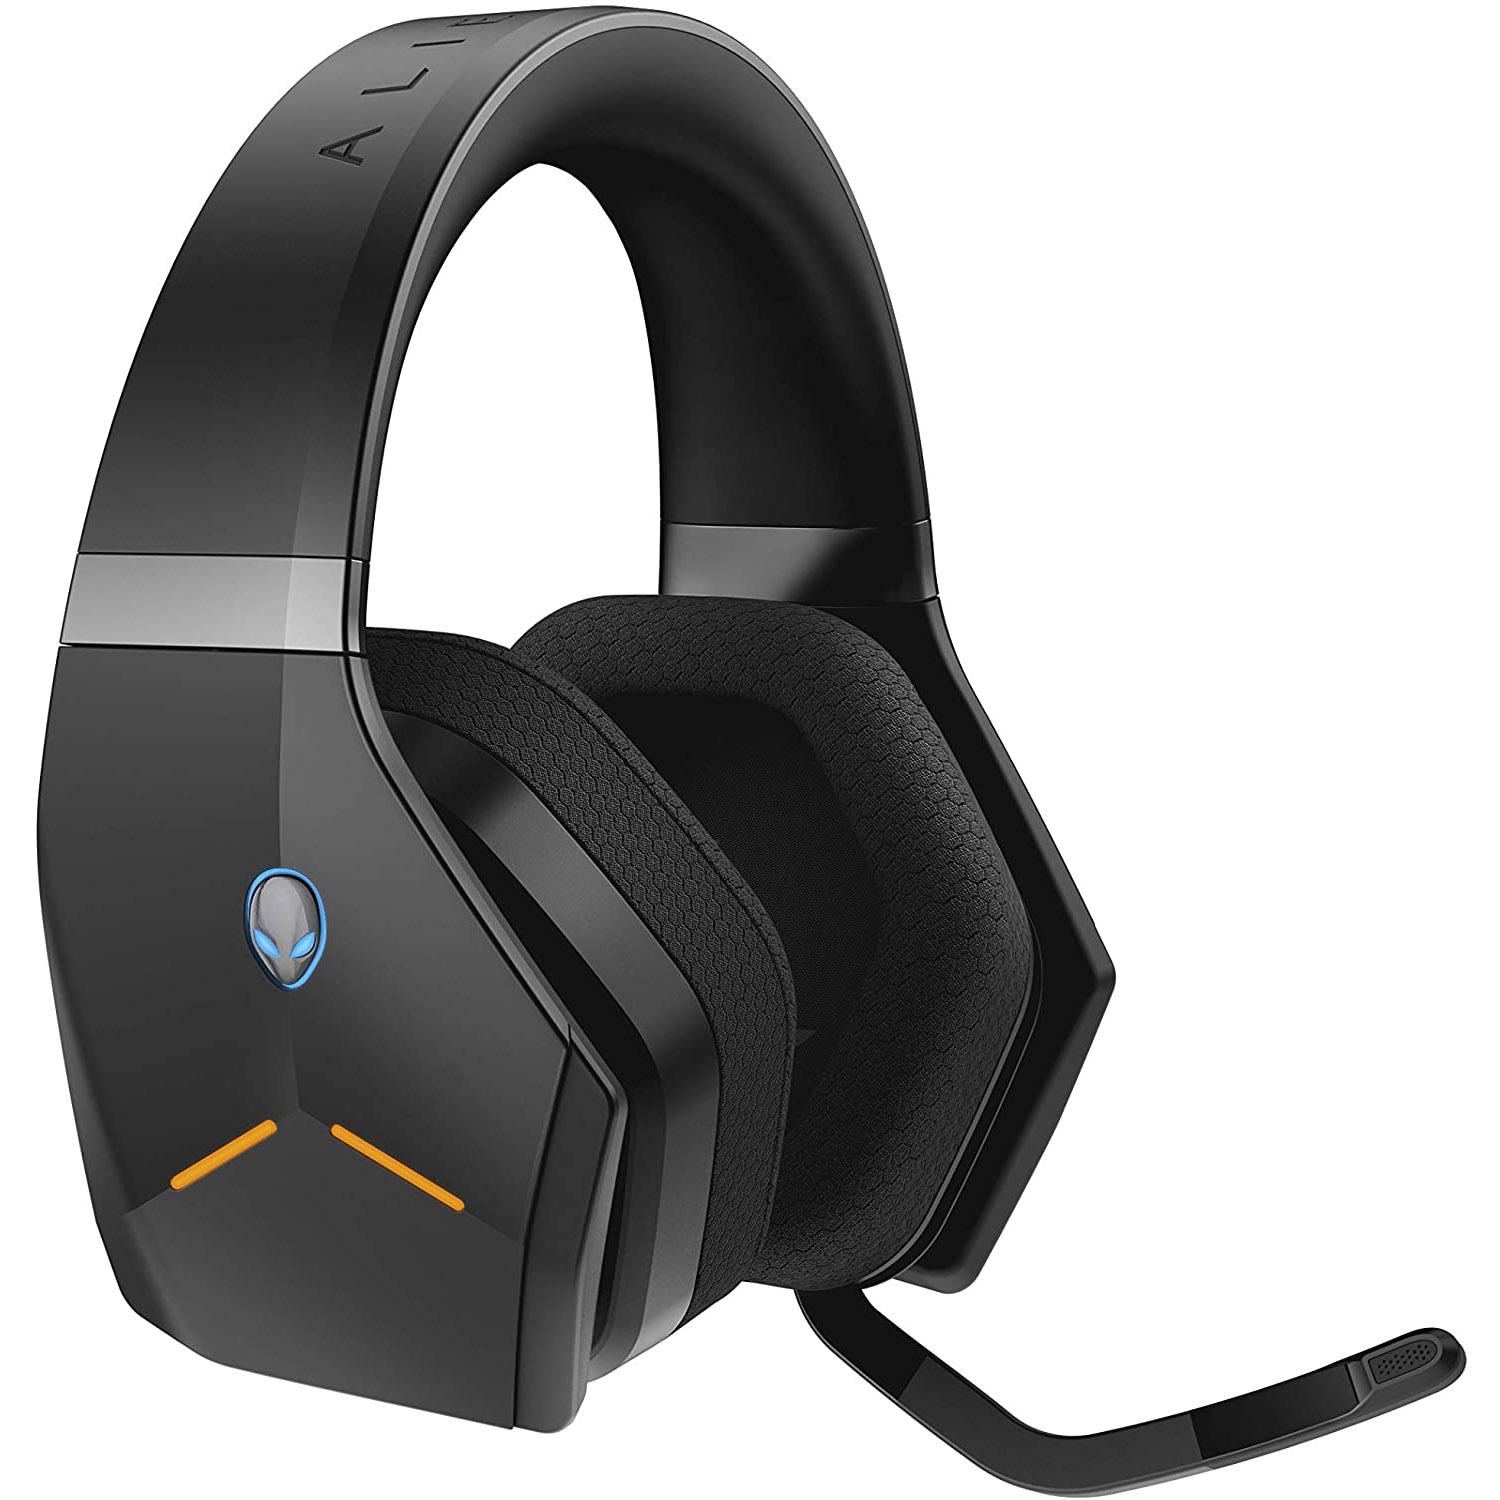 Alienware AW988 Wireless Gaming Headset for $124.99 Shipped